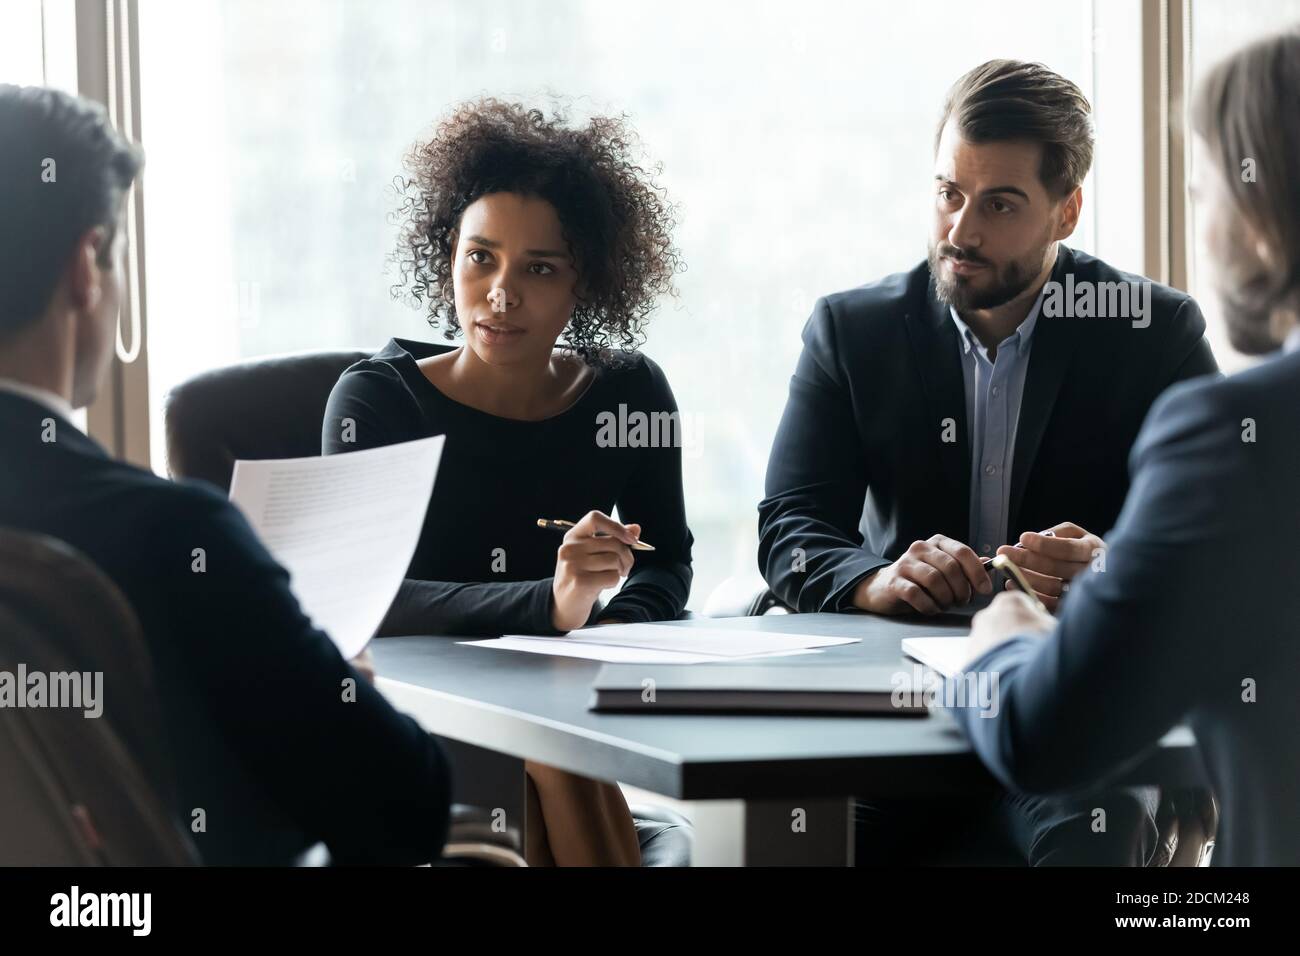 Multiracial businesspeople brainstorm at team office meeting Stock Photo